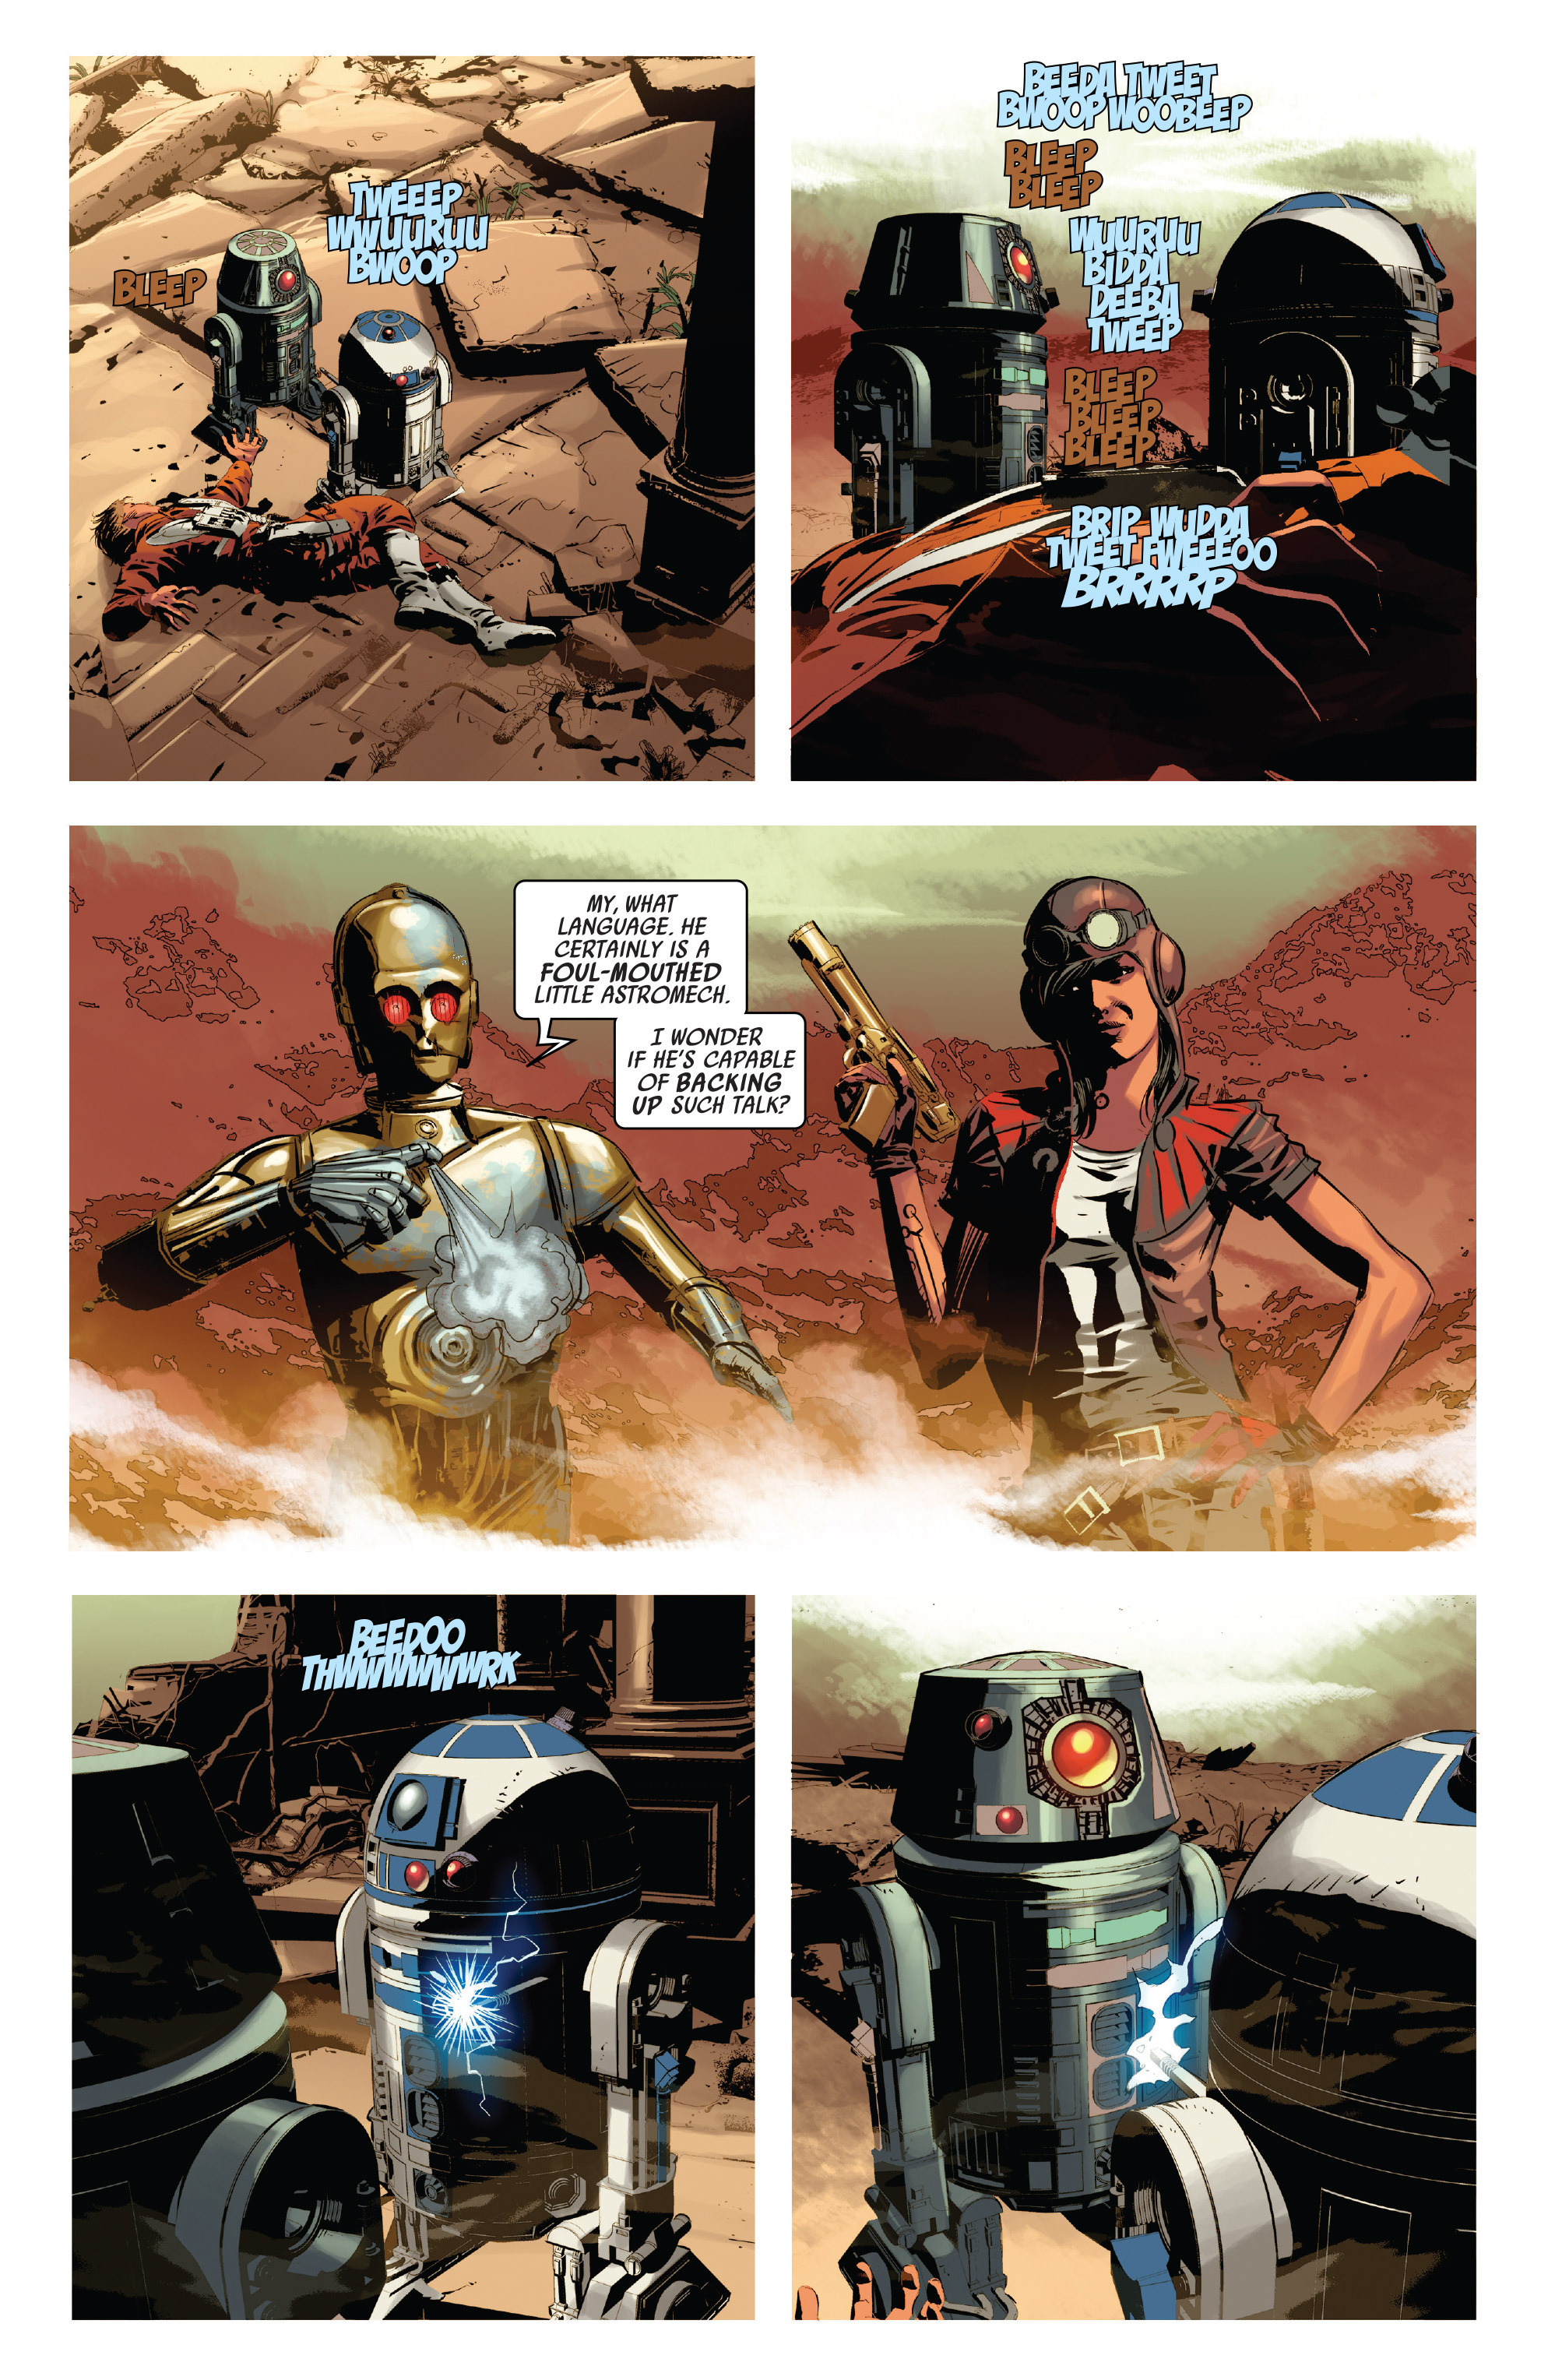 Star Wars (2015-): Chapter 13 - Page 4